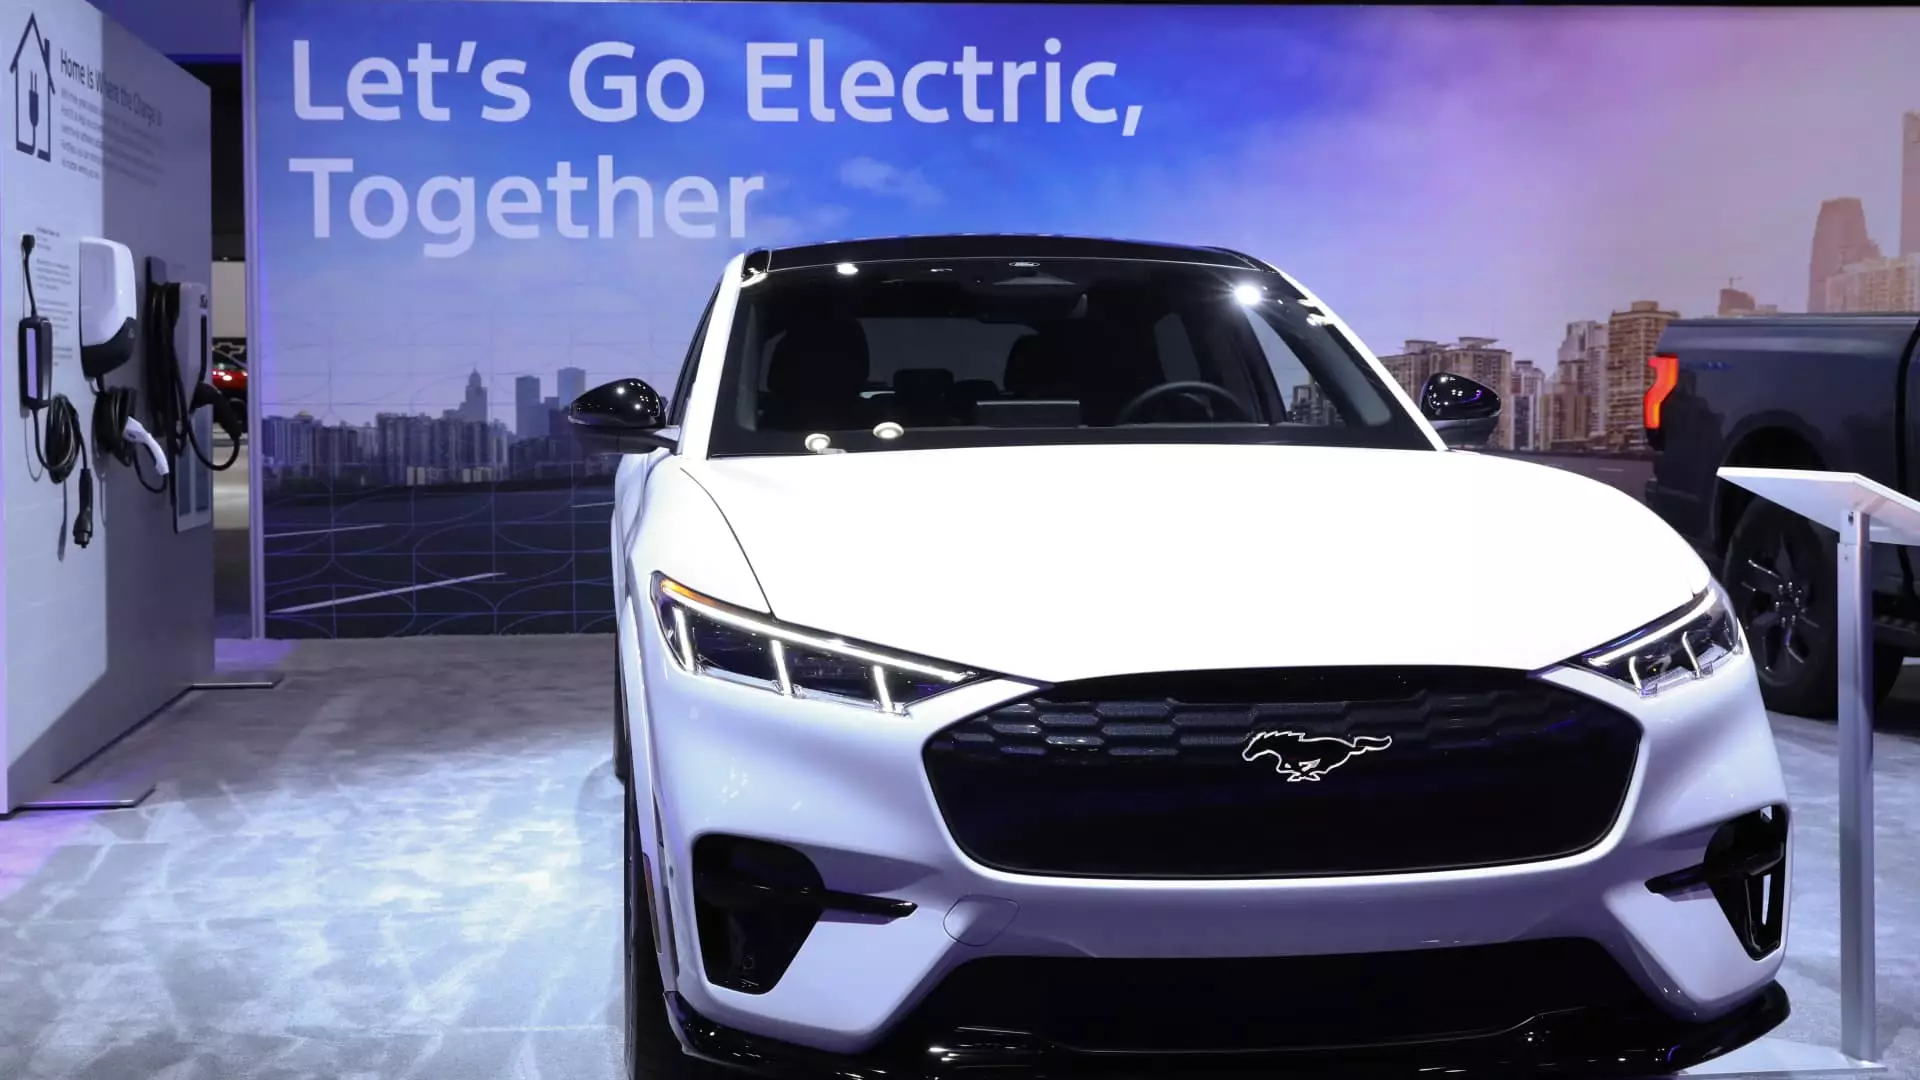 Ford Sees Growth in EV and Hybrid Sales, But Faces Challenges Ahead